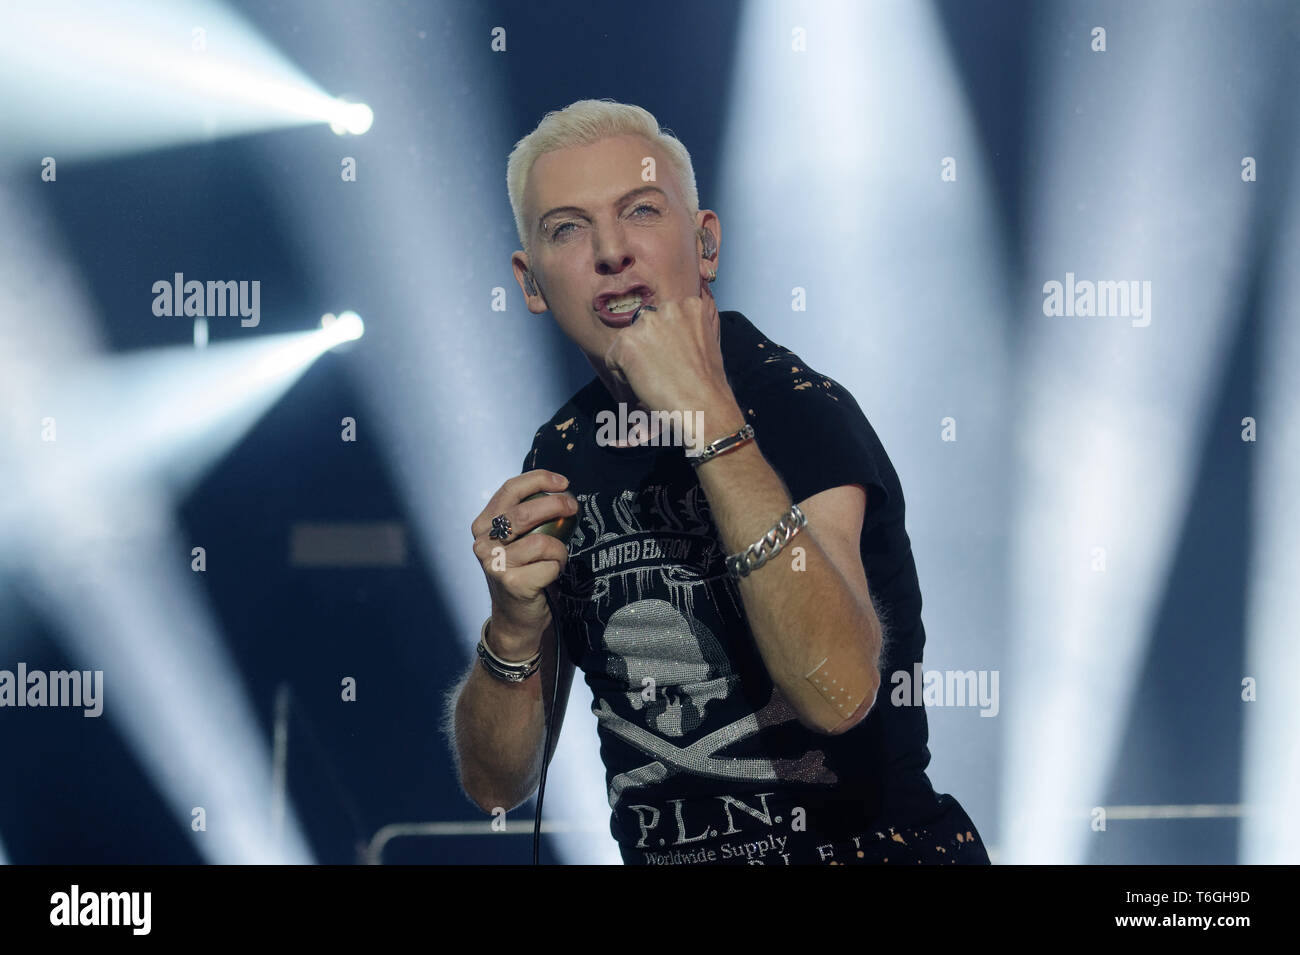 Cologne, Germany. 01st May, 2019. The singer H.P. Baxxter from the band Scooter is stage at a concert to mark the start of the music festival "c/o pop" in the